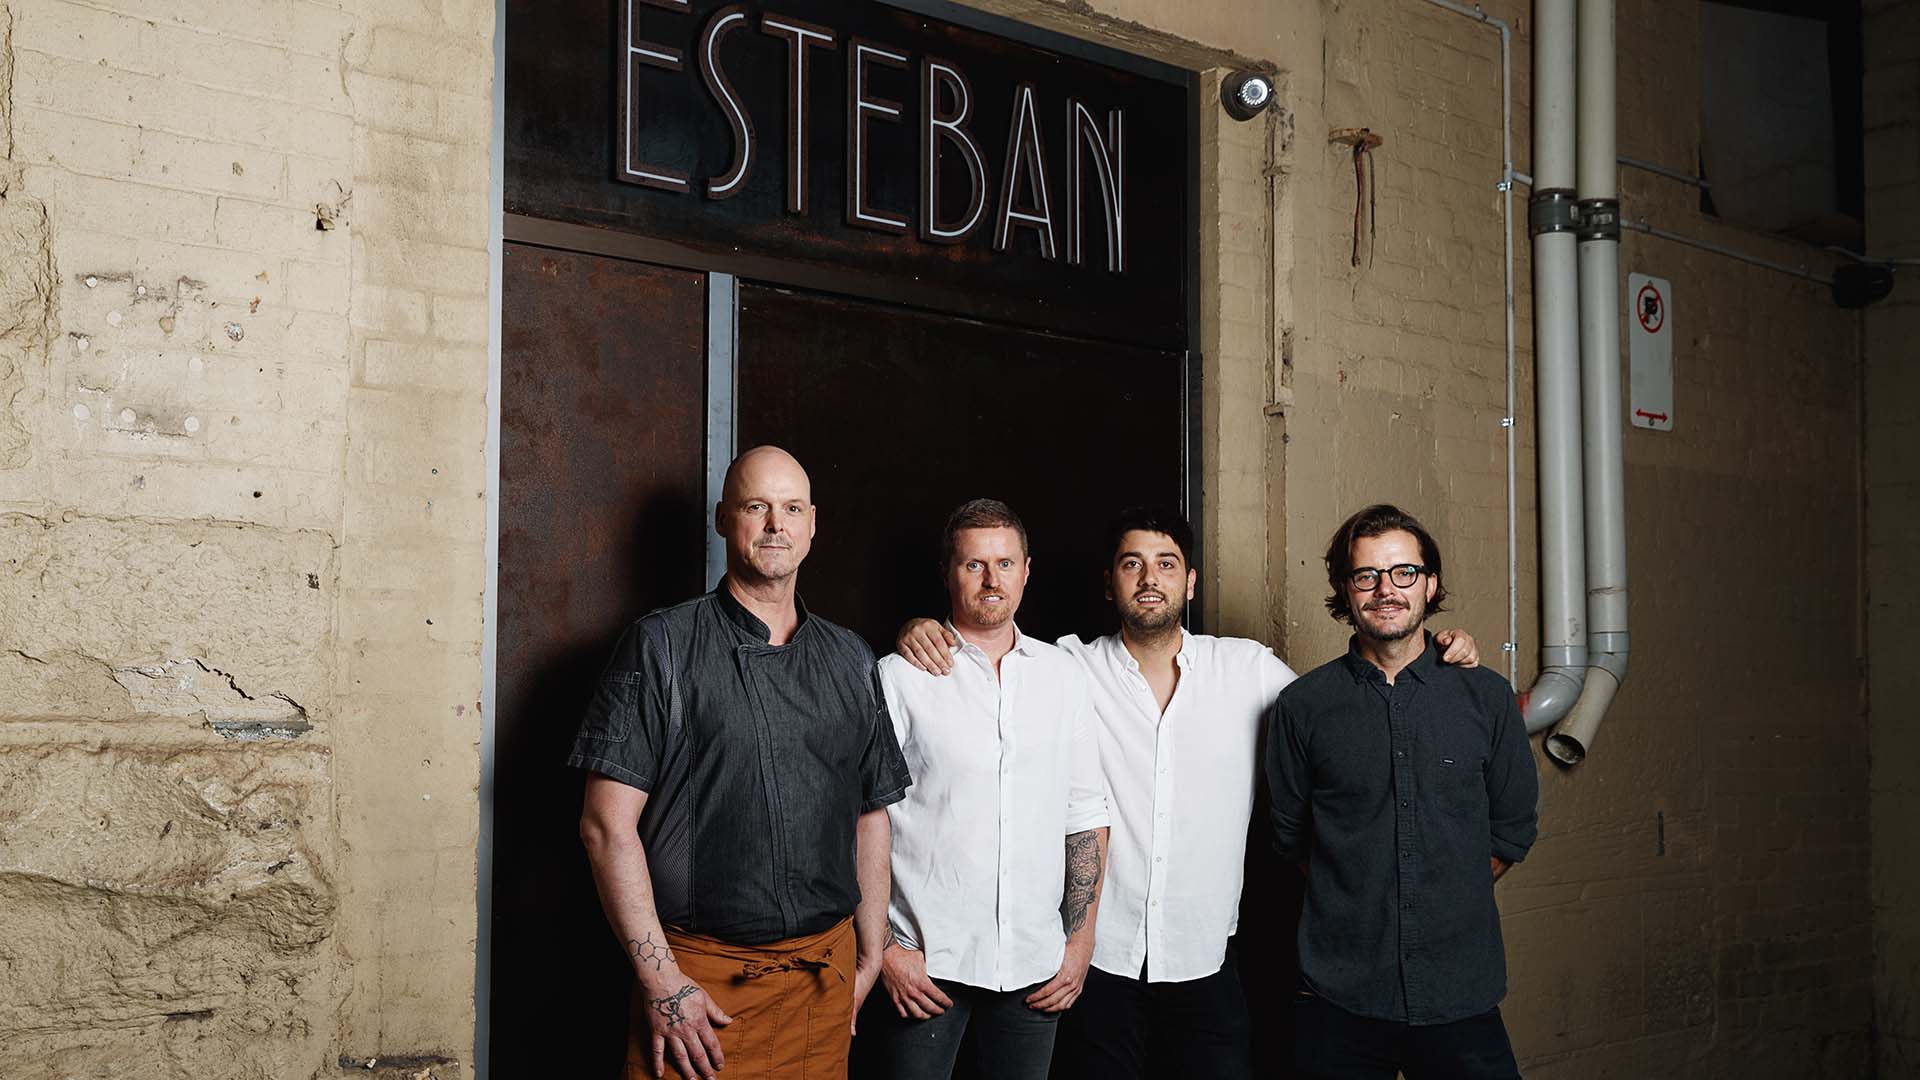 Esteban Is the CBD's New Two-Storey Mexican Restaurant, Mezcal Bar and Laneway Taco Joint